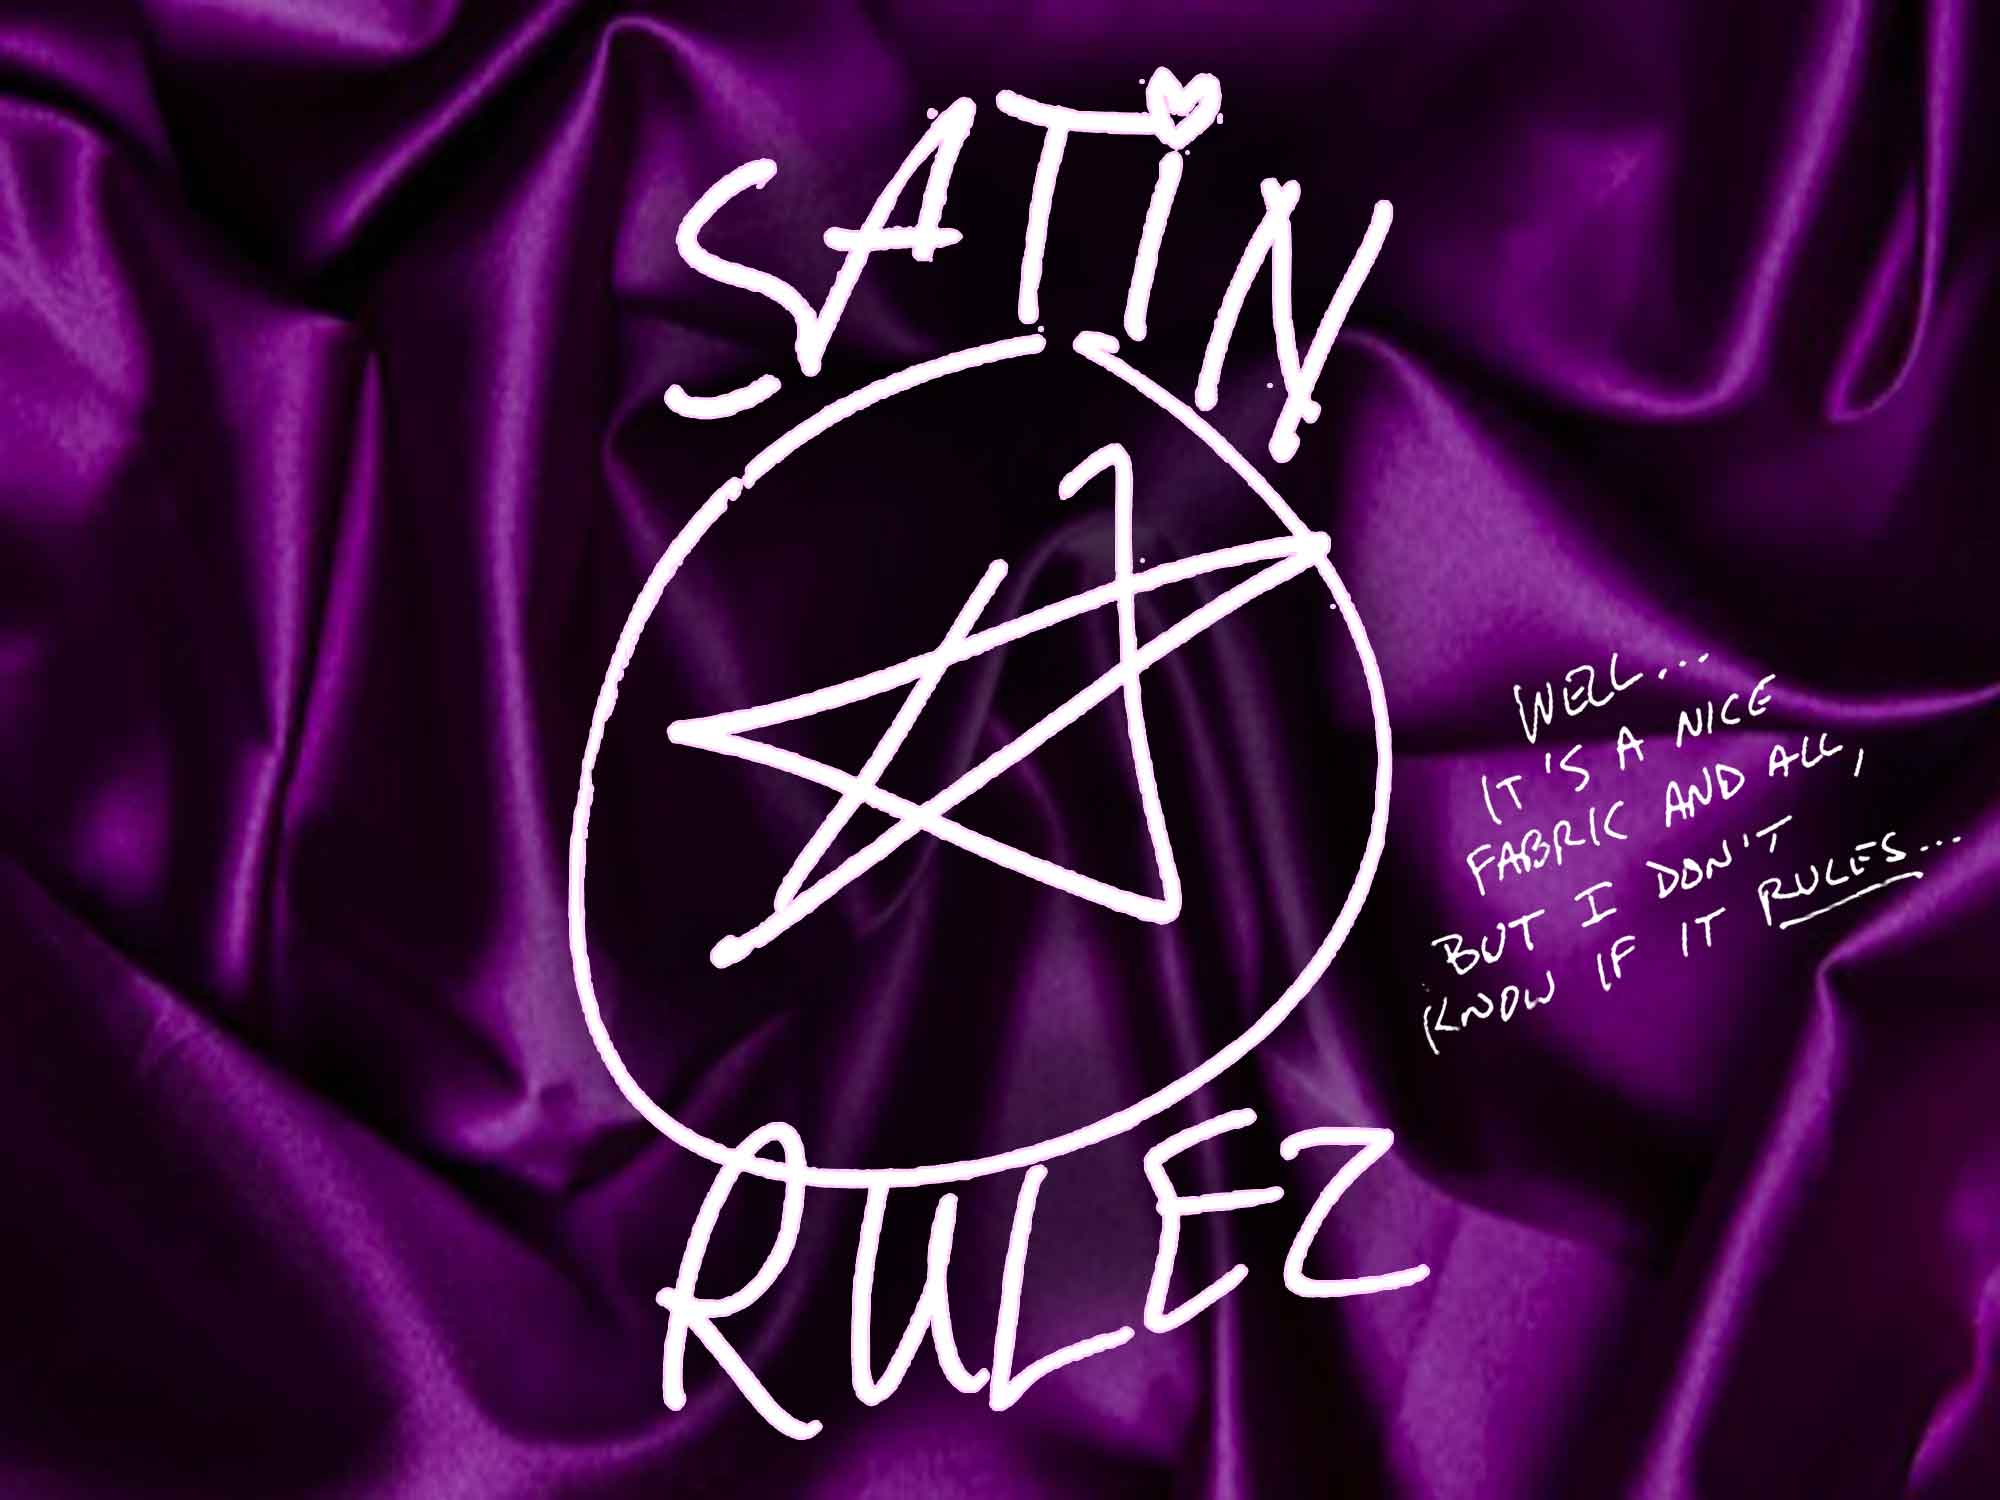 Satin Rules: Teen Confuses Satin for Satan in Graffiti Message